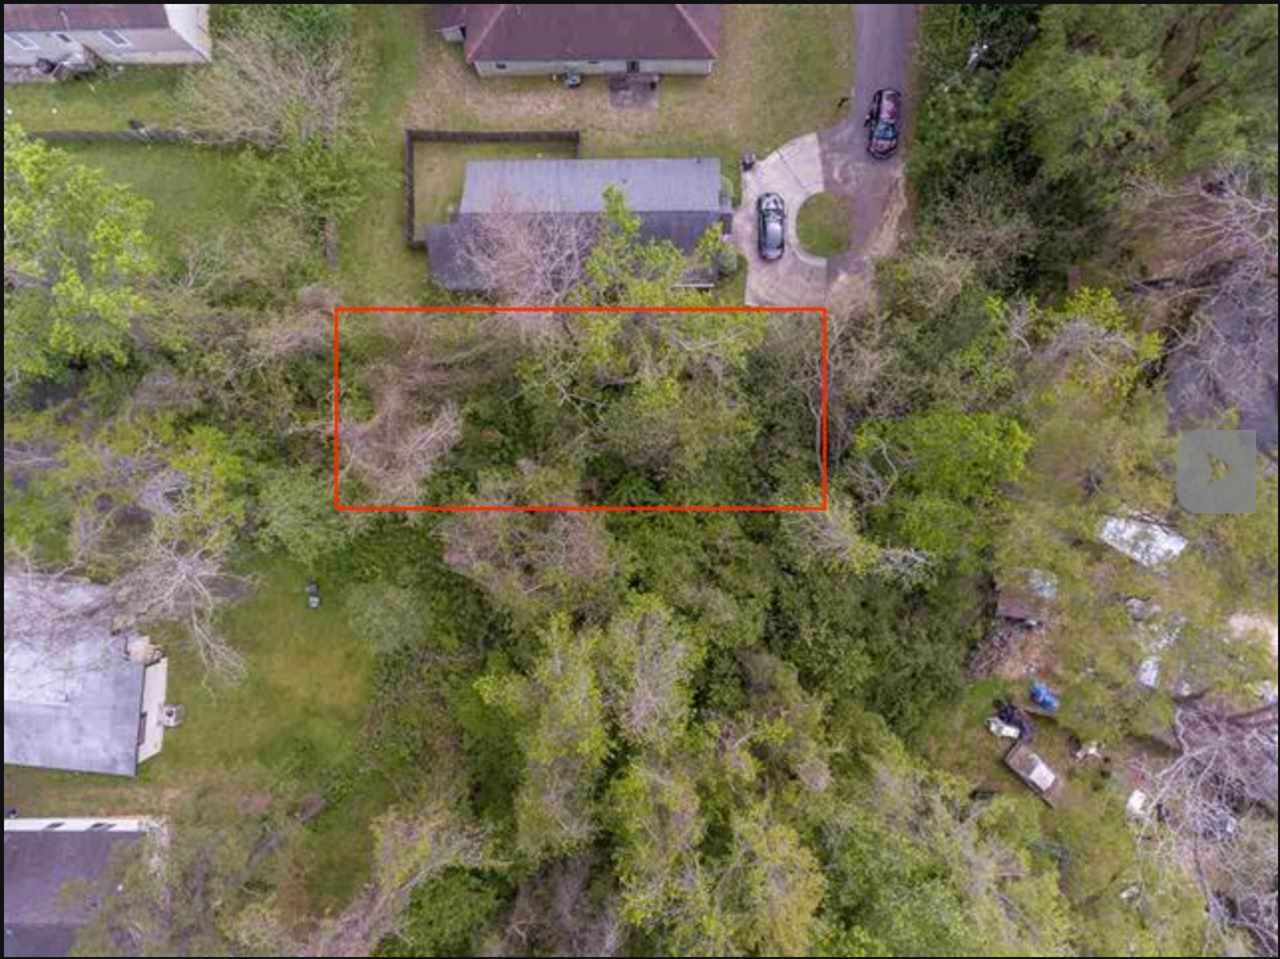 Lot is located right next to address: 2848 Lonnbladh Rd | Tucked away right off of Lonnbladh Road in the community of Tallahassee Highlands located in NE Tallahassee. Great school zones. A great location to build a single family home or investment opportunity to earn significant positive cash flow at this price.